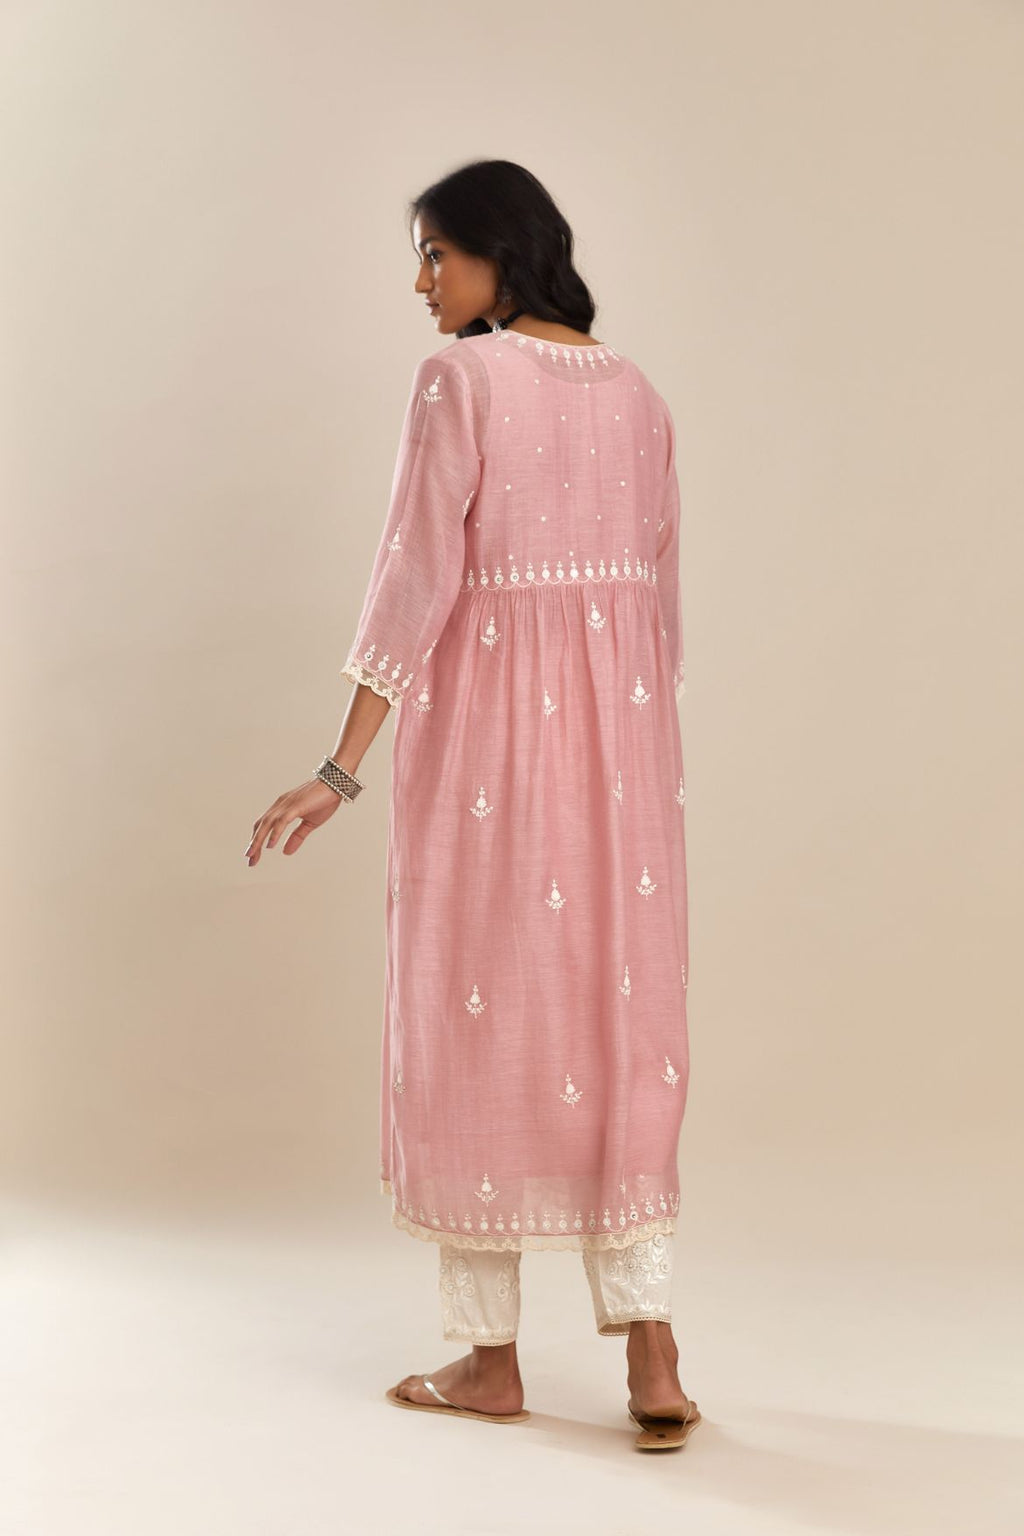 Pink cotton chanderi kurta set with off white silk thread embroidery and cotton slip inside, highlighted with hand attached sequin and beads.